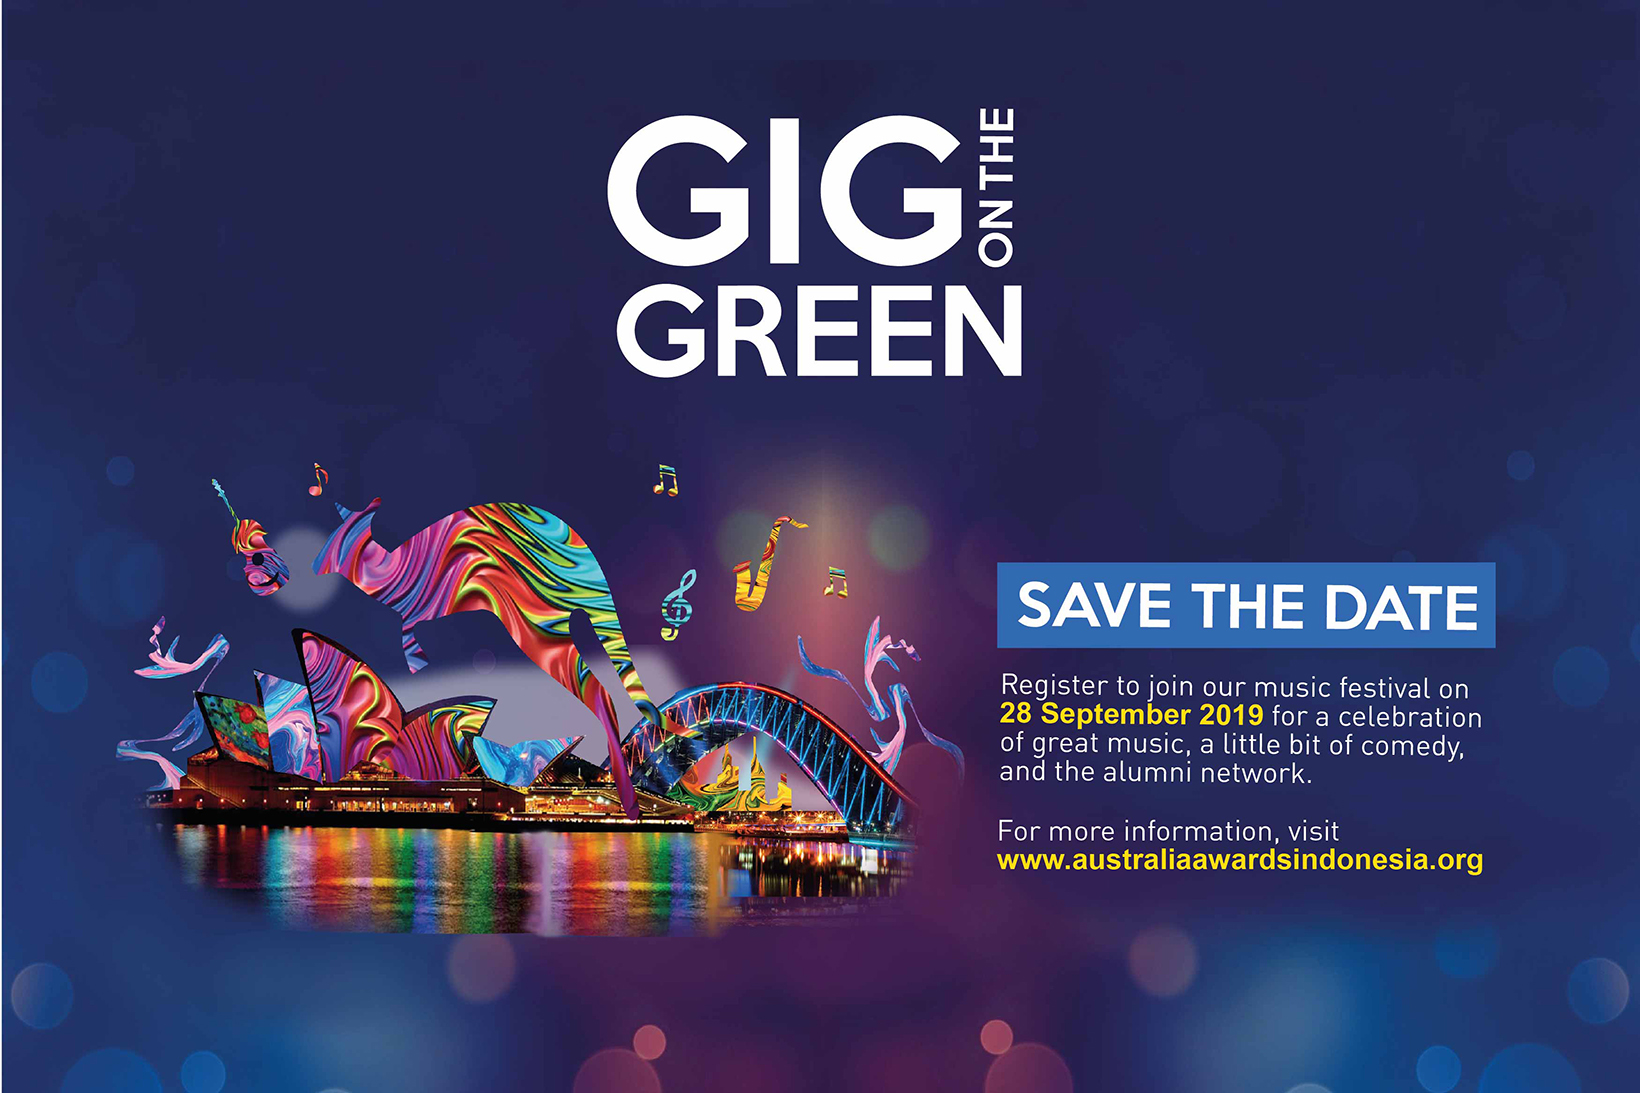 Gig on the Green 2019 is back!